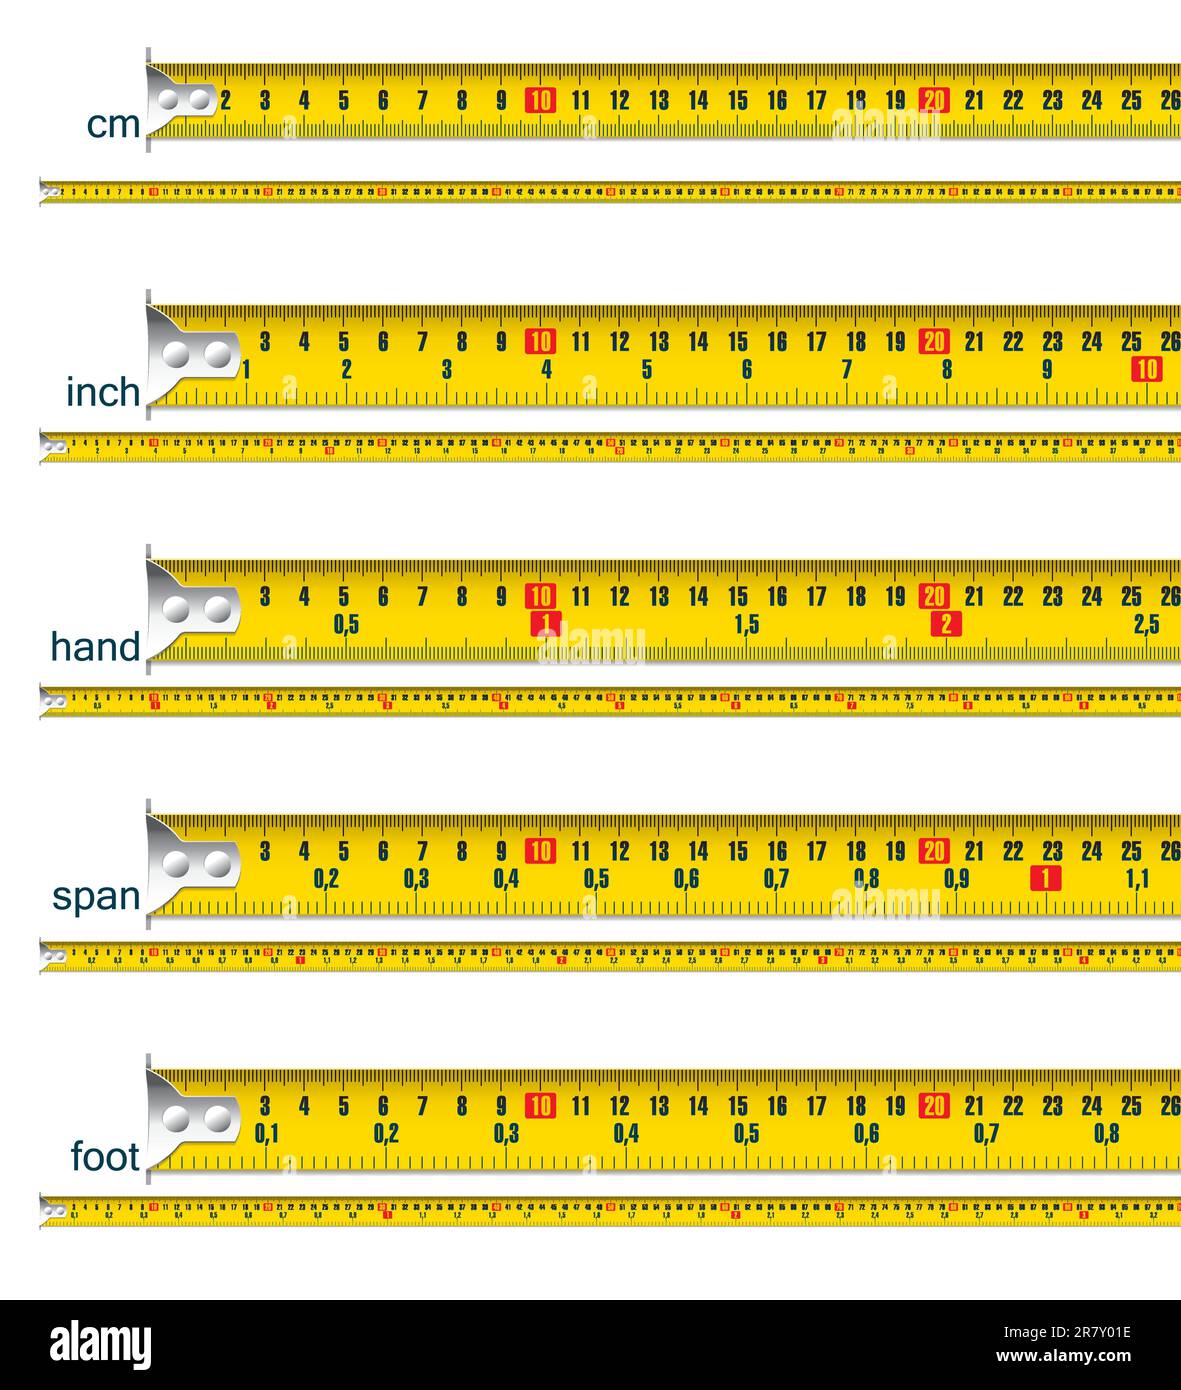 tape measure in cm, cm and inch, cm and hand, cm and span, cm and